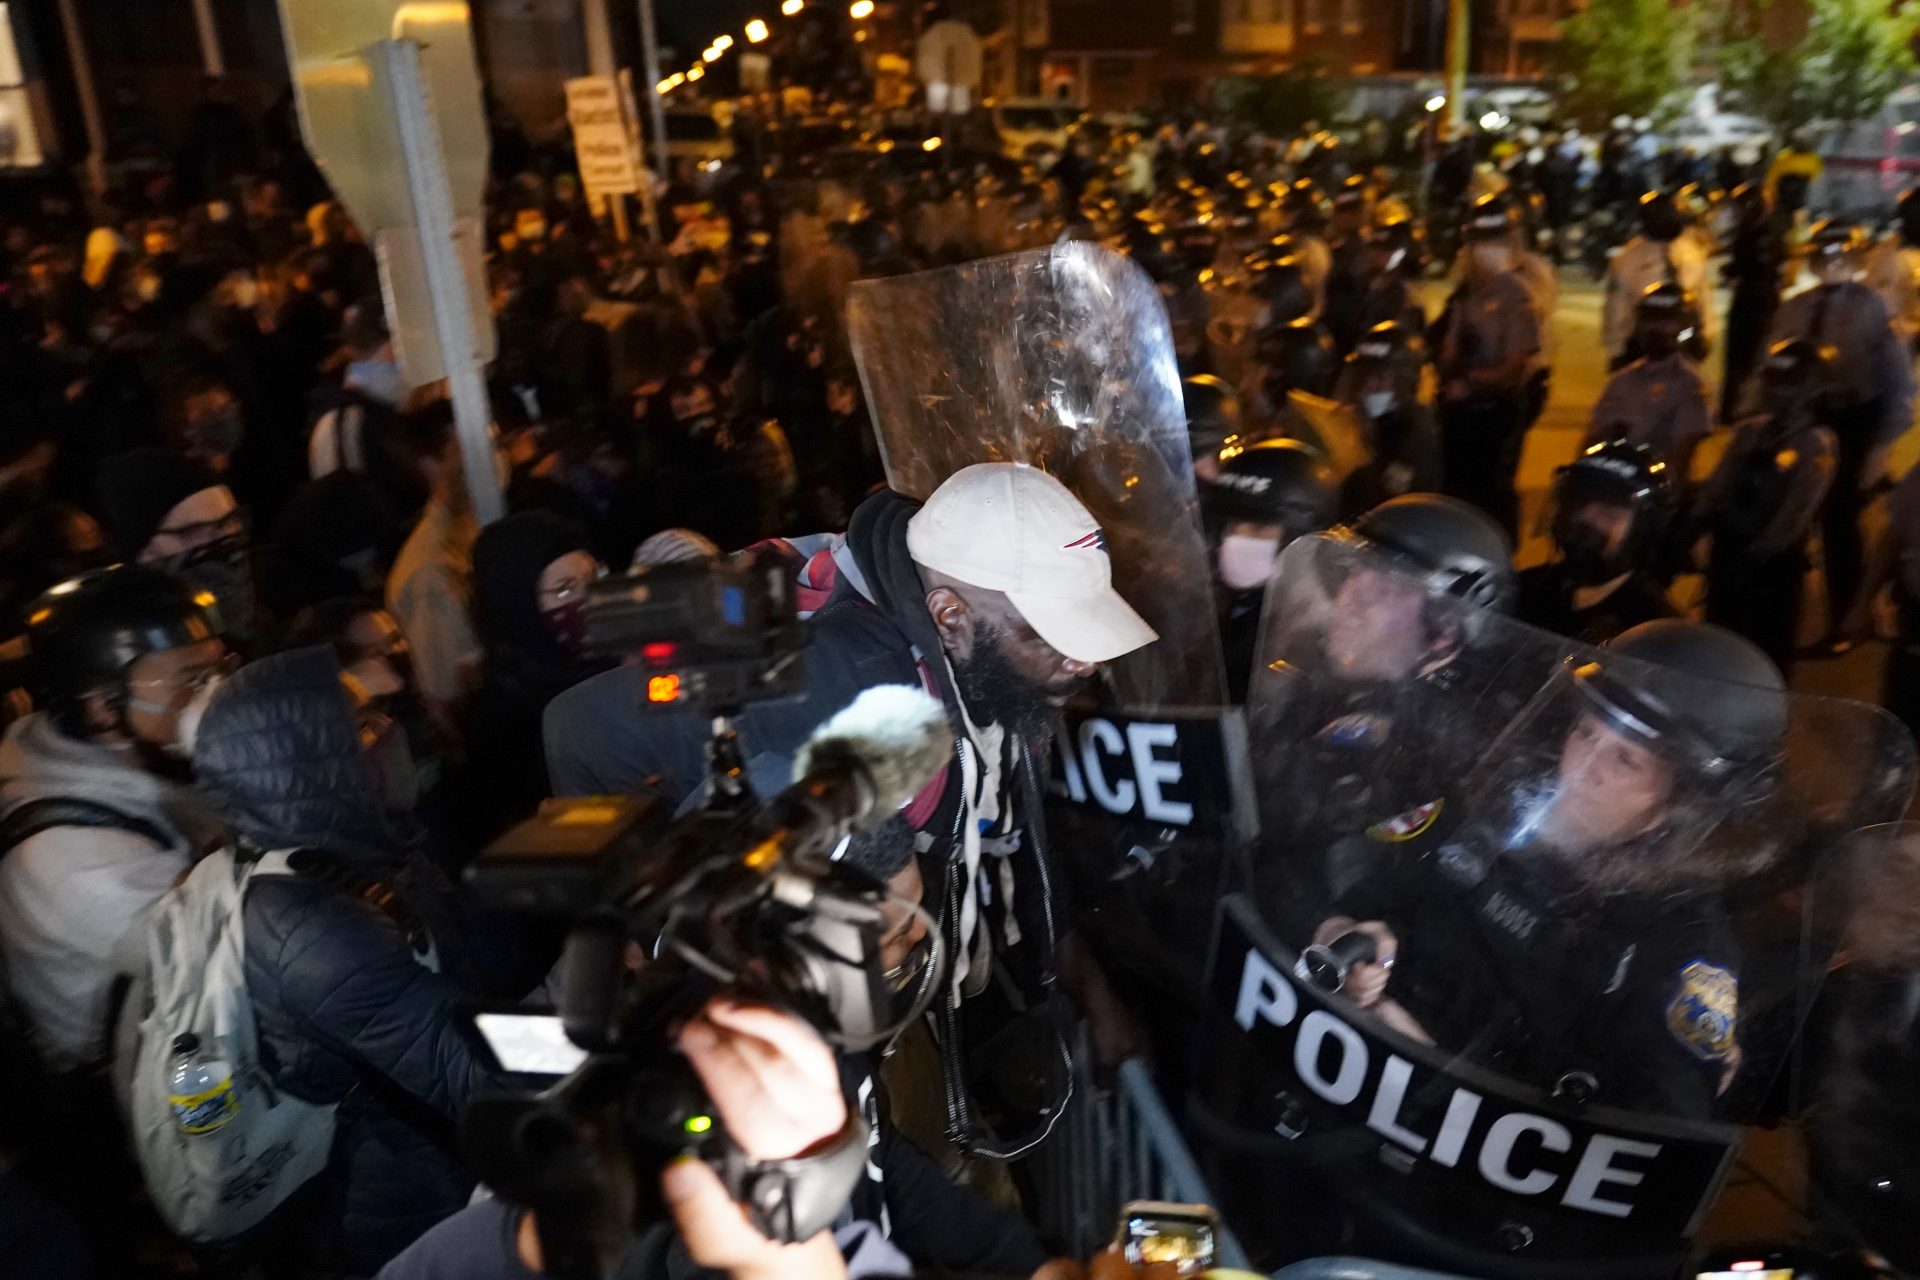 A protester confronts police during a march Tuesday Oct. 27, 2020 in Philadelphia.